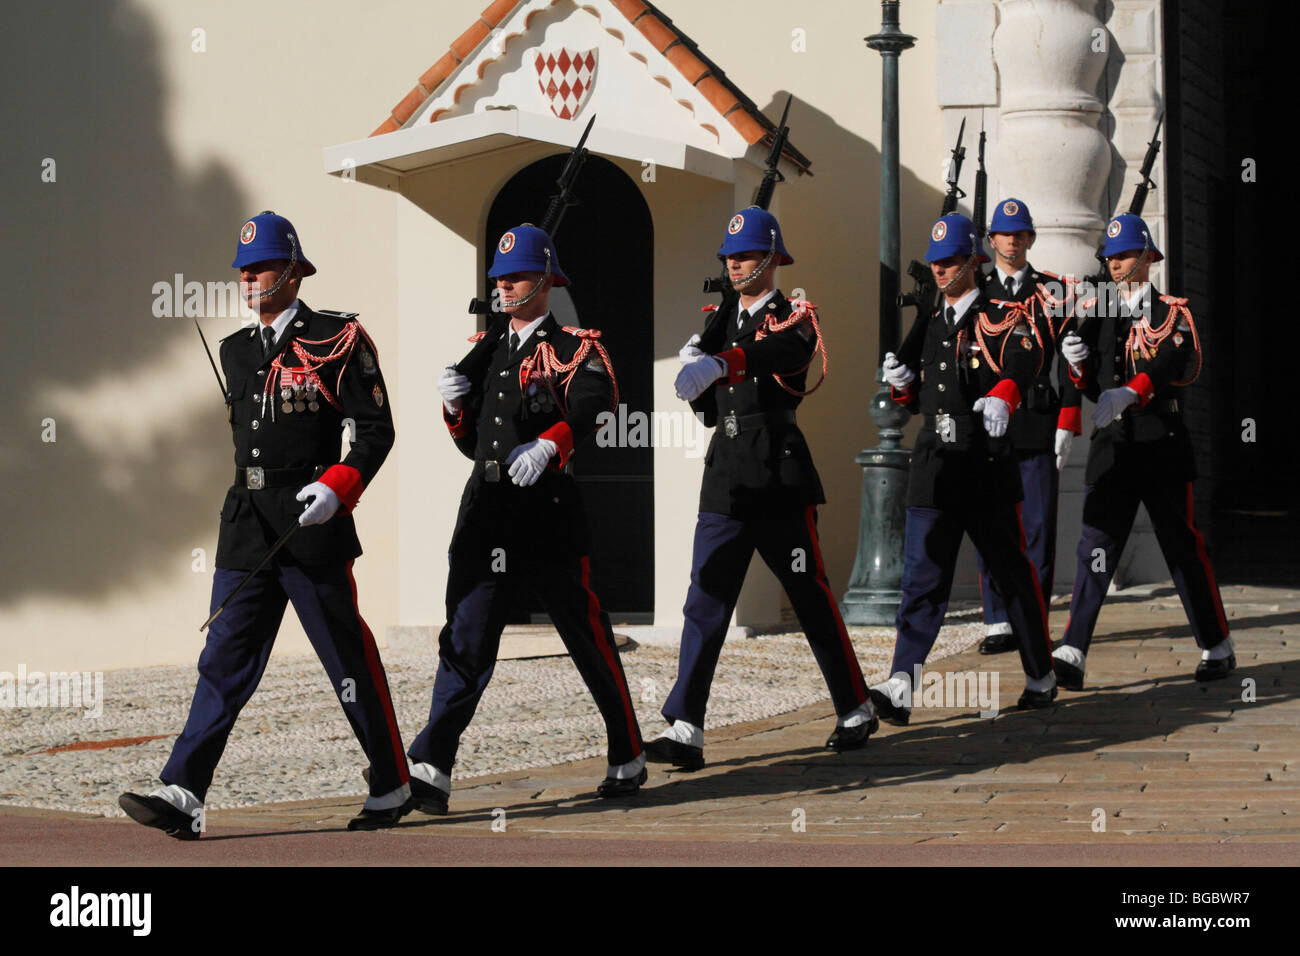 Changing of the Princely Guard at noon in front of the Prince's Palace, departure of the relieved guard, Principality of Monaco Stock Photo